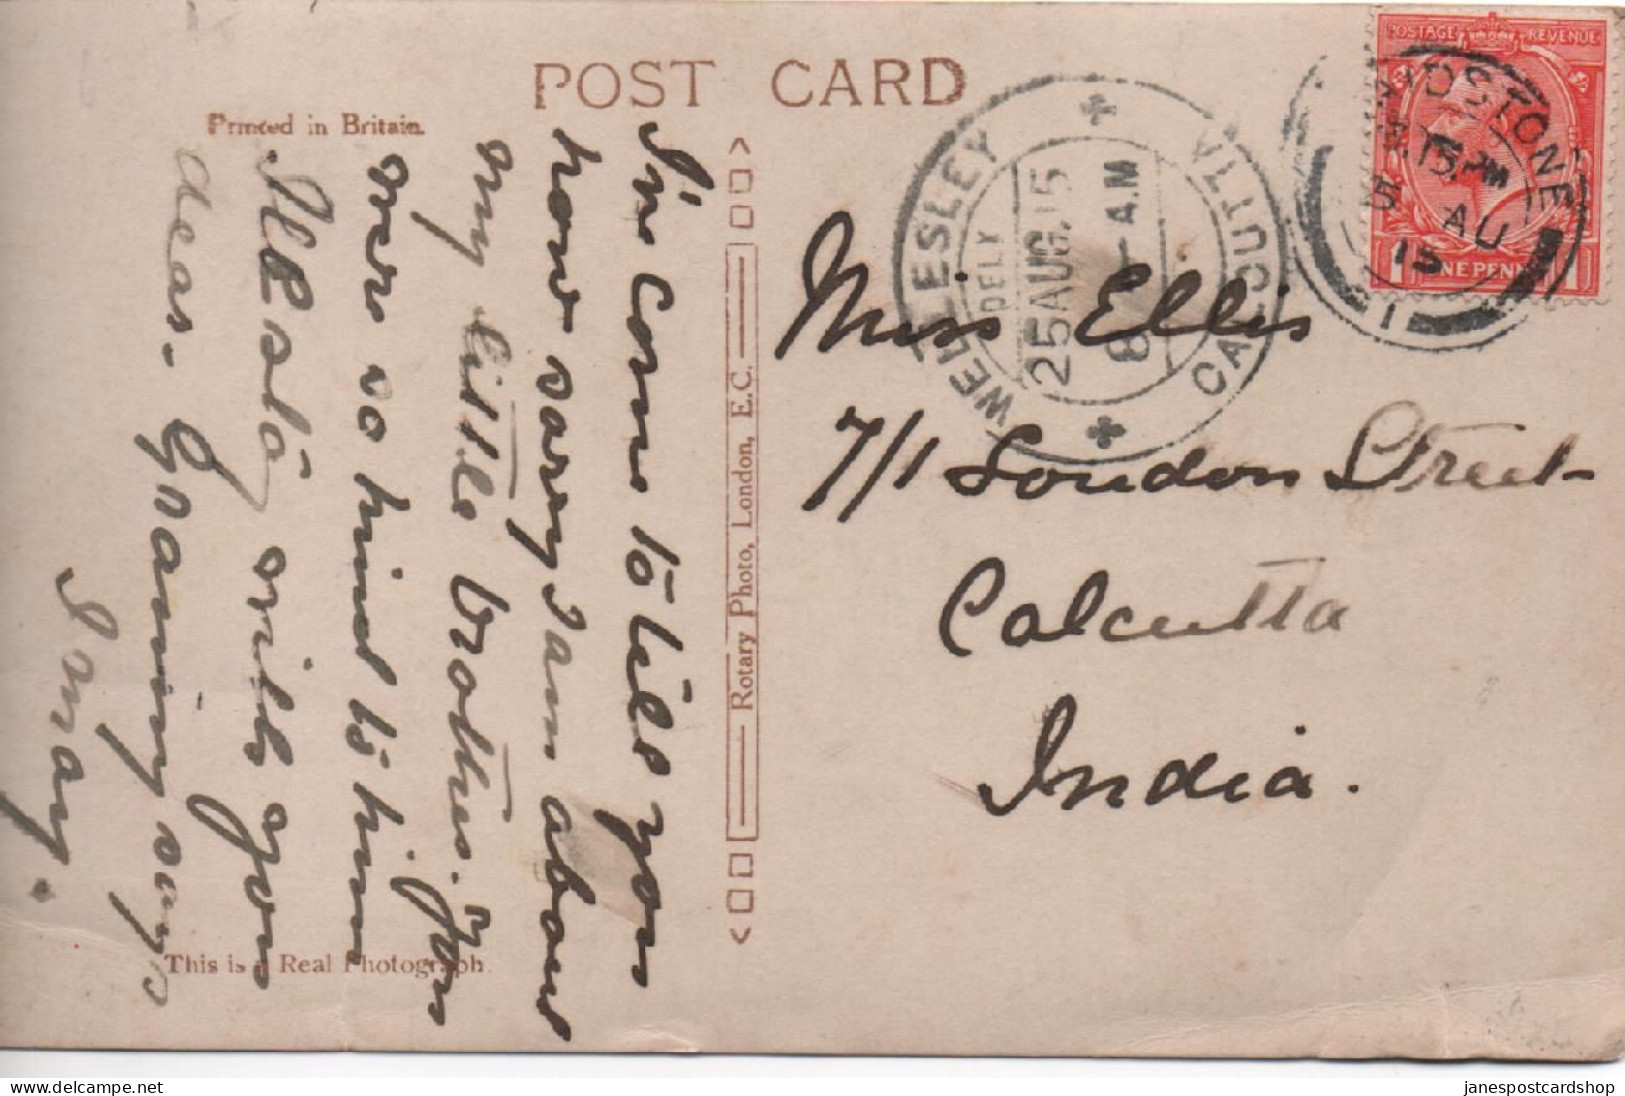 GOOD WELLESLEY CALCUTTA INDIA POSTMARK - ON REAL PHOTOGRAPHIC POSTCARD OF A CAT - Postales